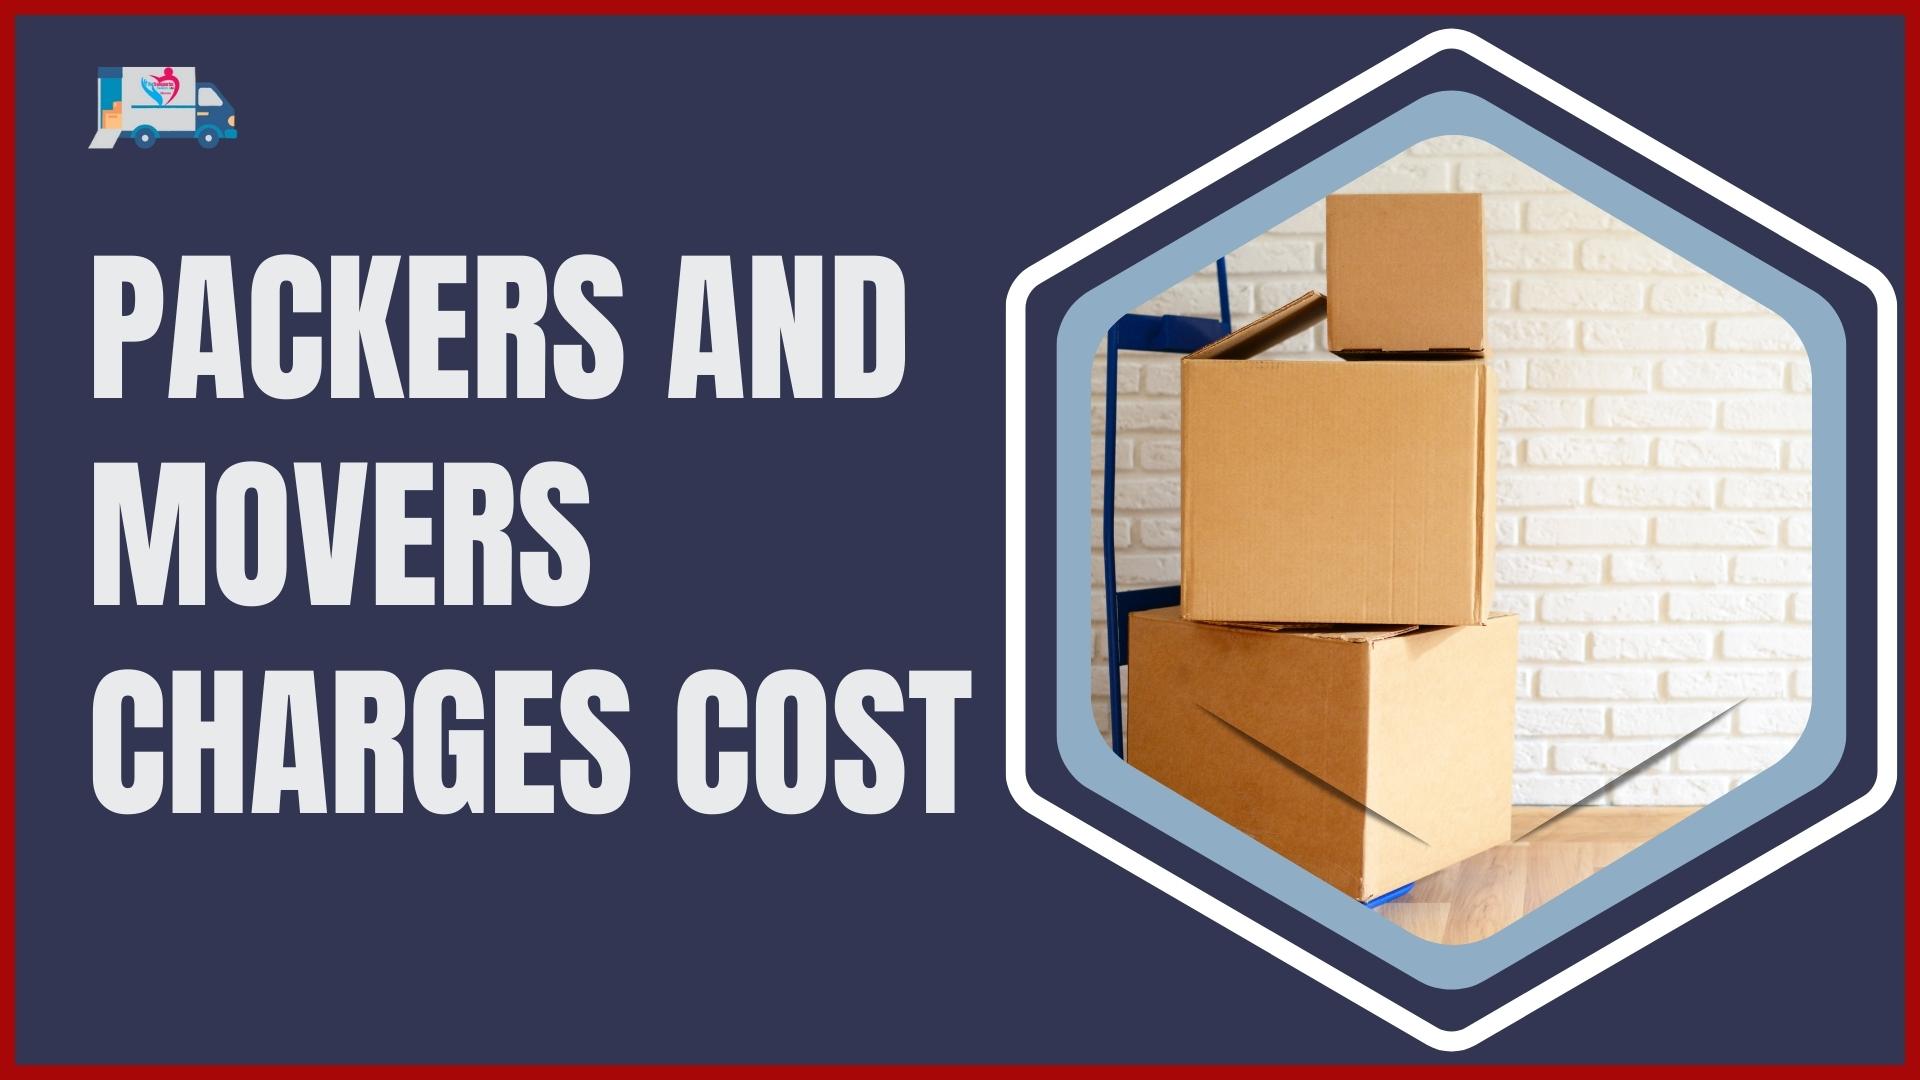 Packers and Movers offers competitive movers and packers Ludhiana rates and excellent services